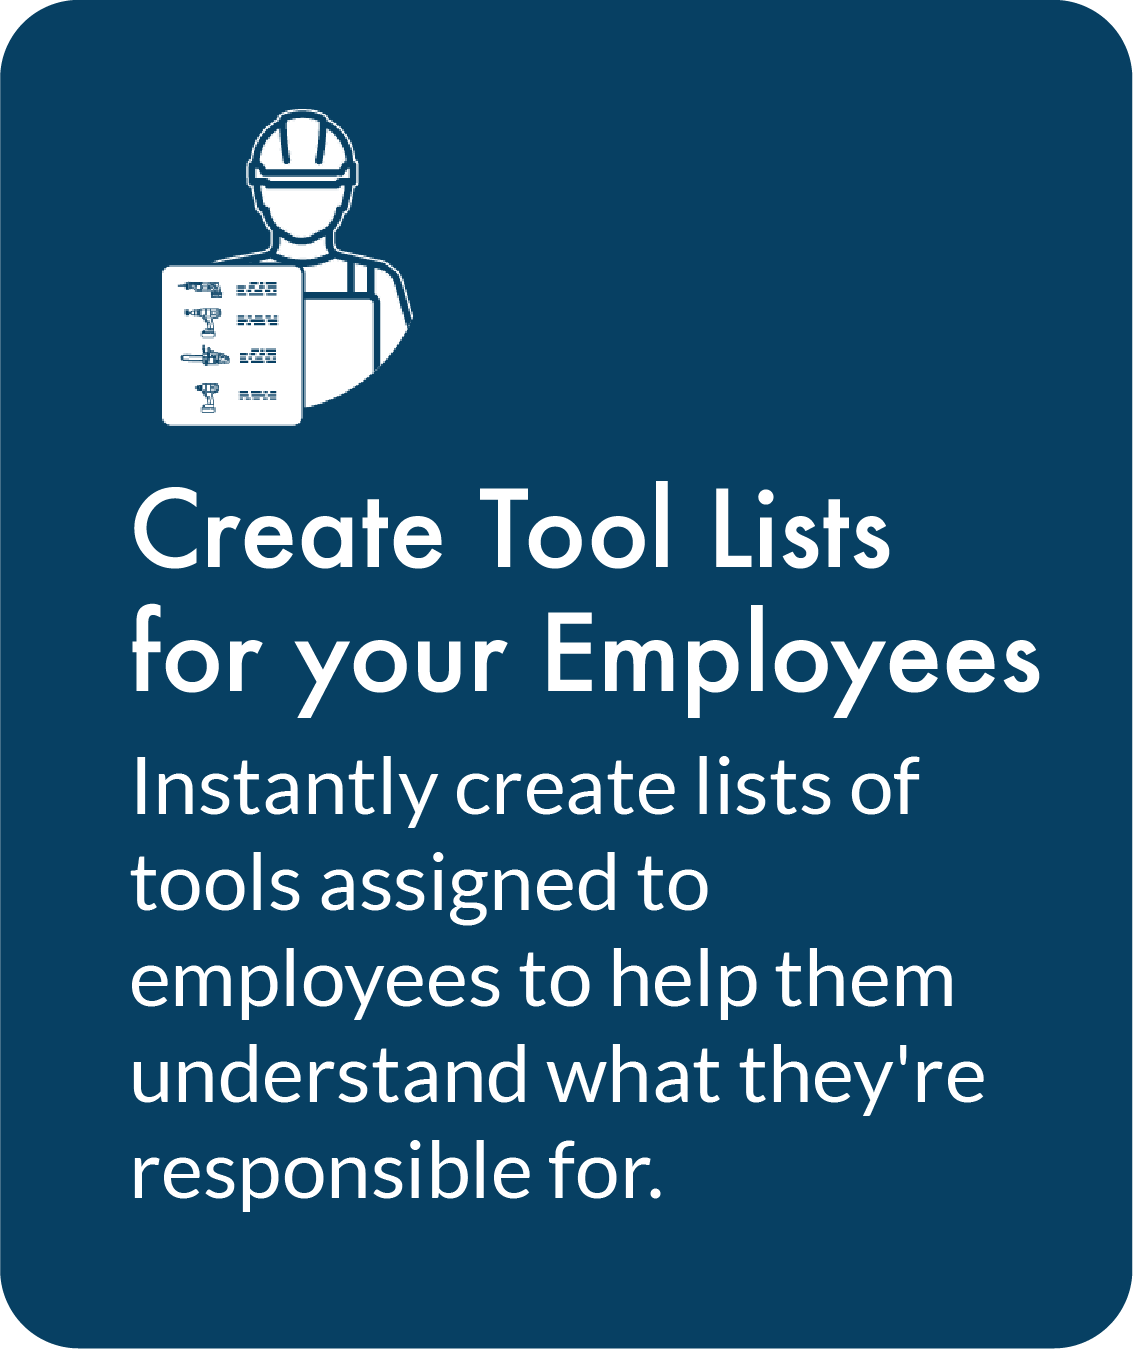 Create Tool Lists for your Employees. Instantly create lists of tools assigned to employees to help them understand what they're responsible for.